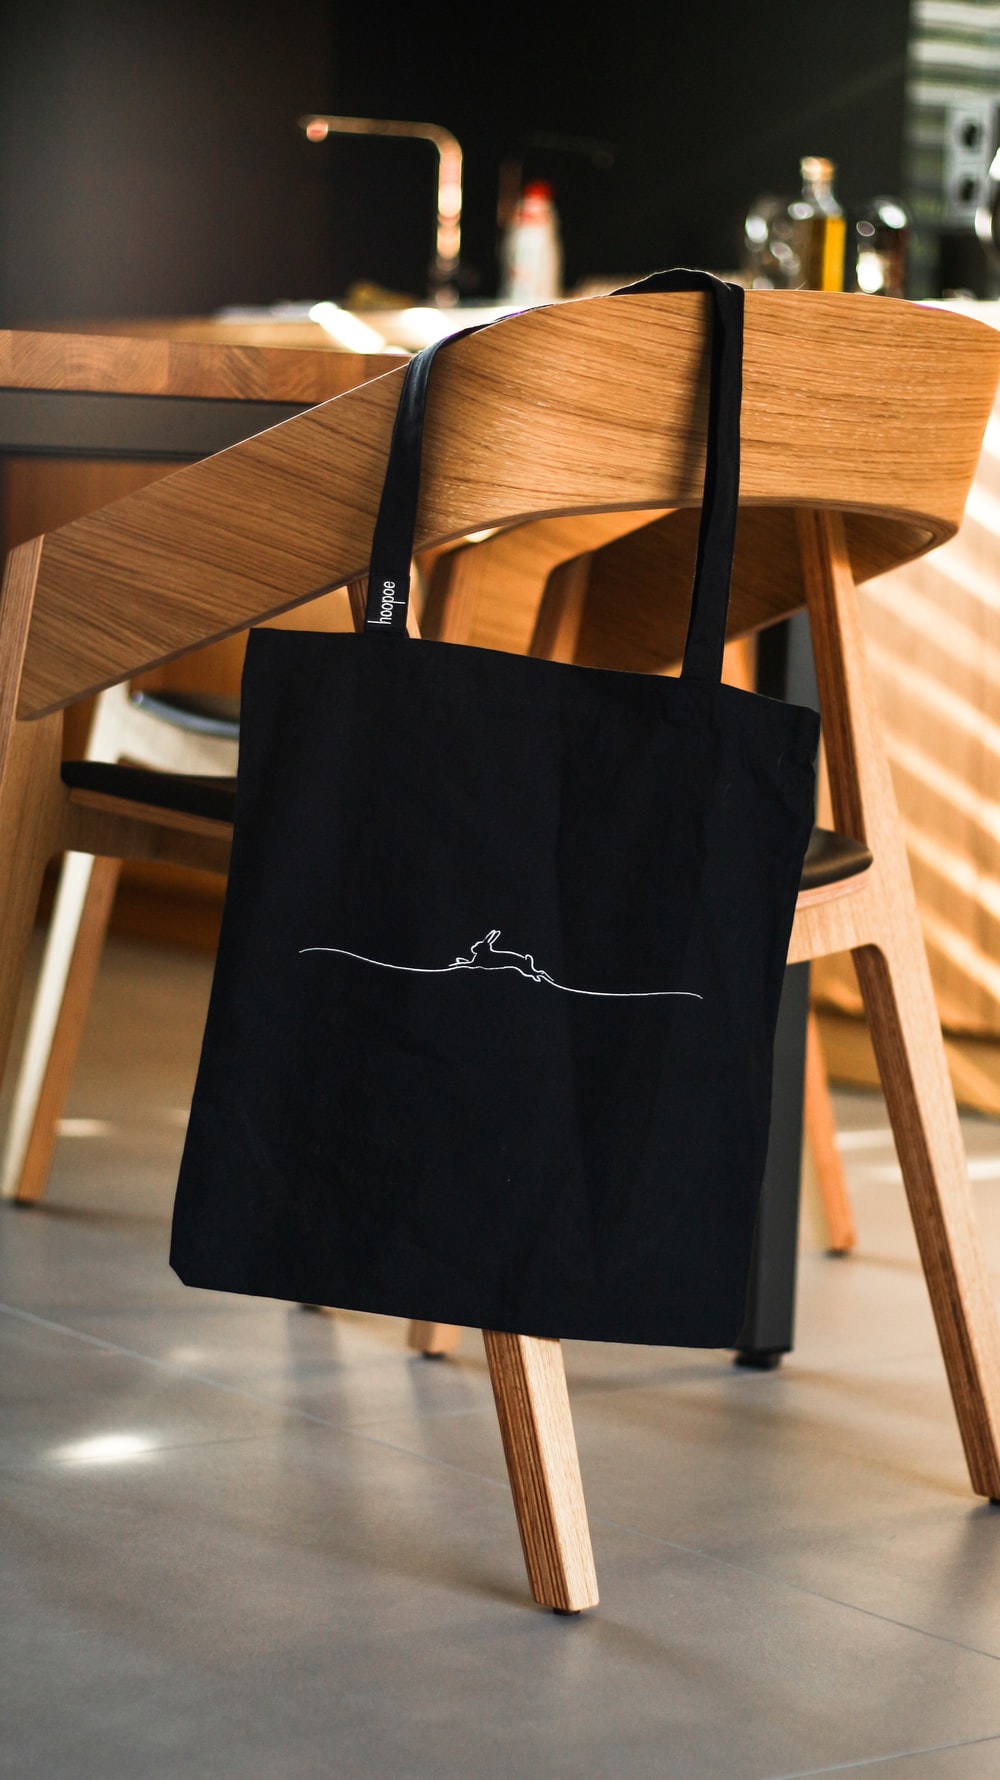 Canvas Bag Picture. Download Free Image